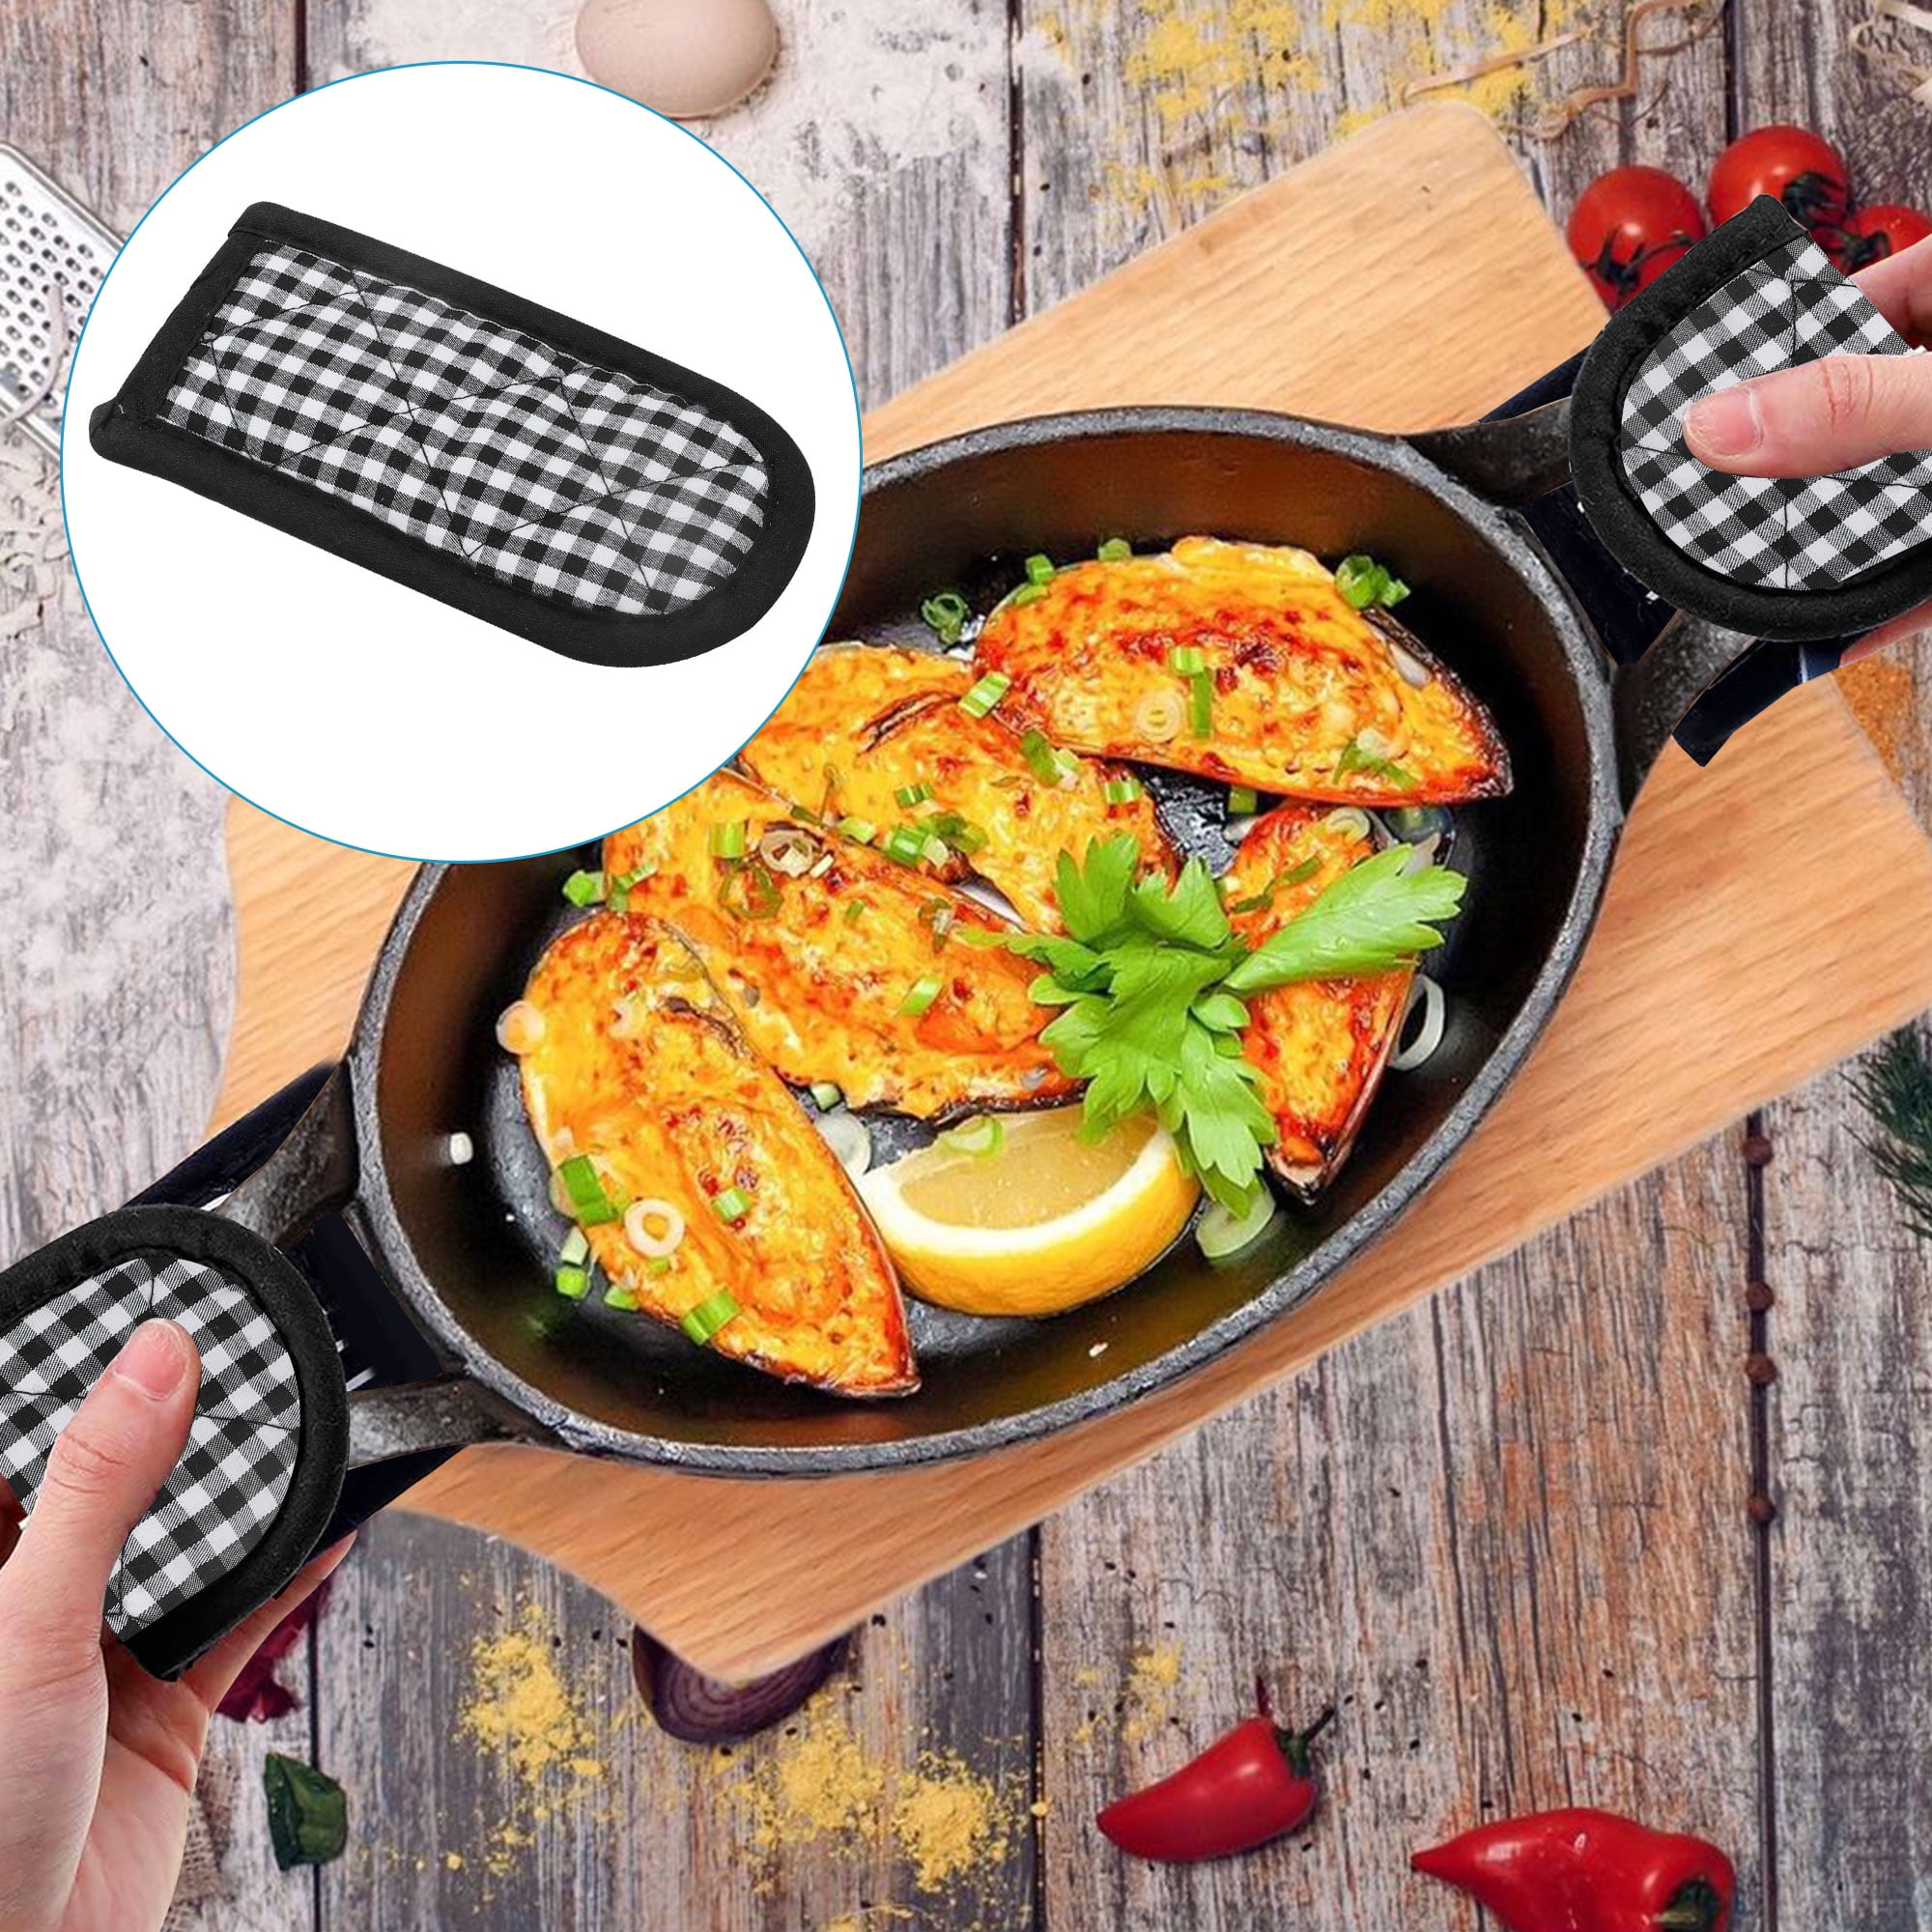 Gustave 4 Pack Silicone Hot Handle Holder Pan Handle Sleeve Pot Holders, Heat Resistant Cast Iron Skillet Handle Covers for Kitchen, BBQ and Baking